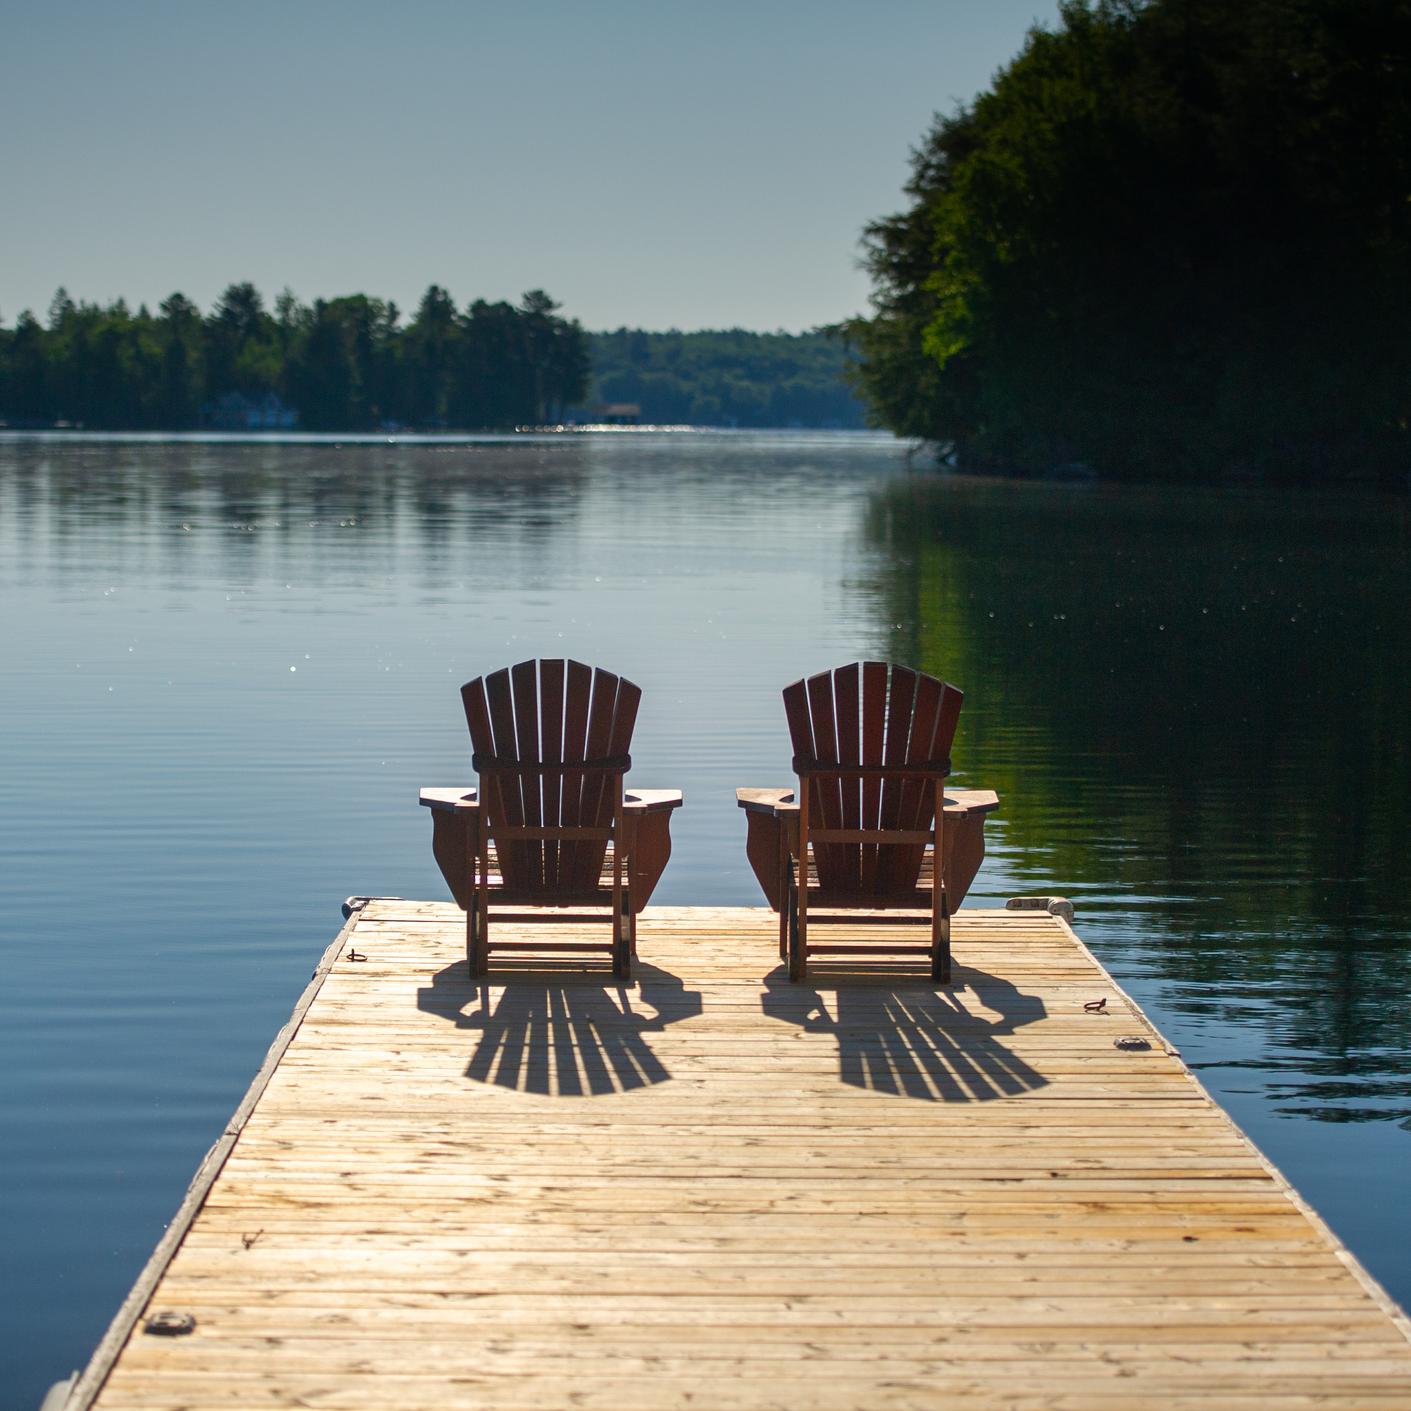 Two Muskoka chairs sitting on a pier over a lake in summertime